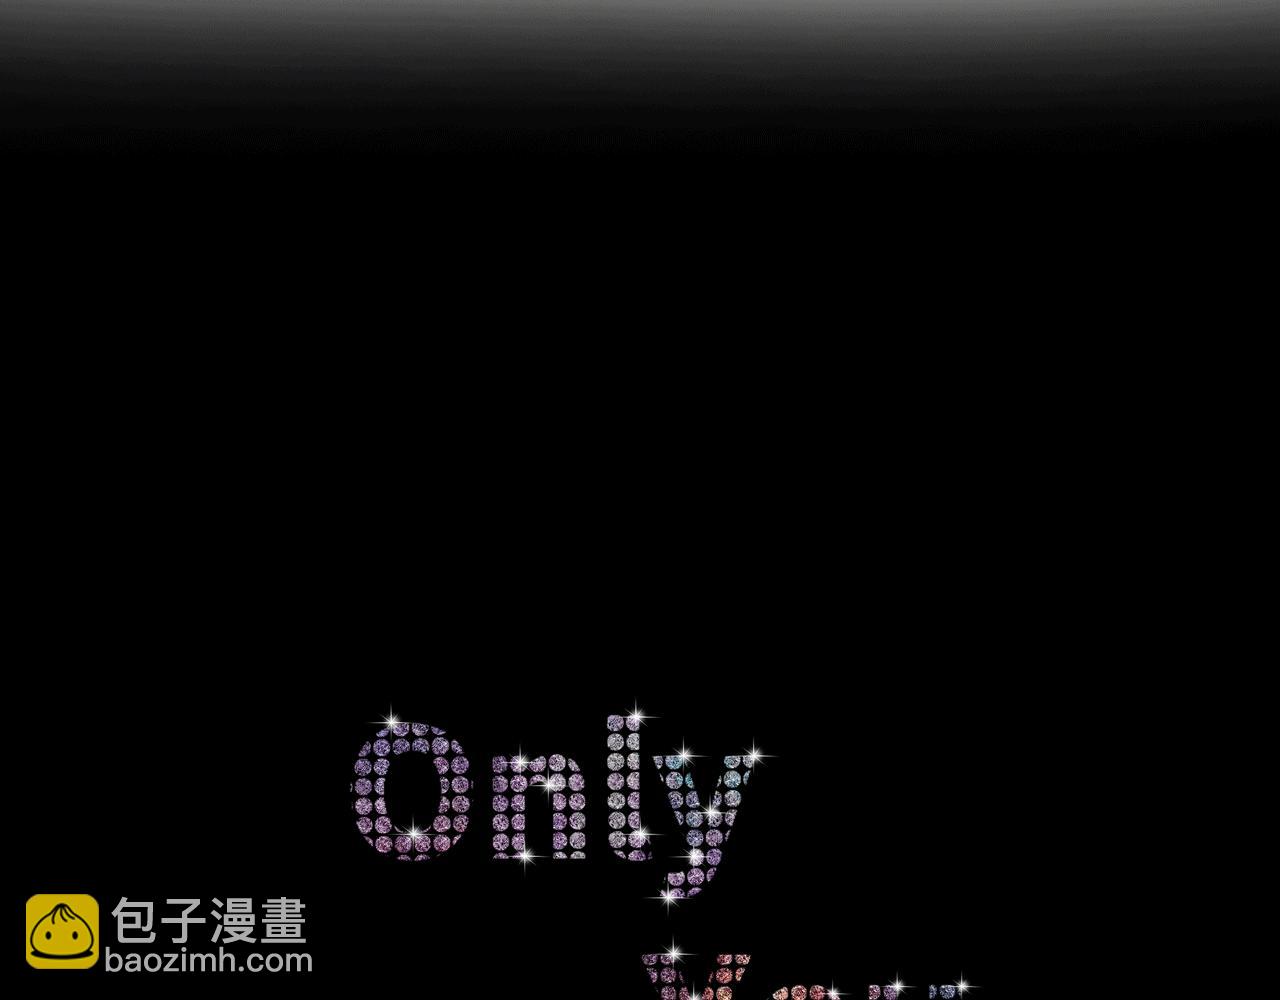 Only You之禁錮 - 第17話 傷害(1/4) - 4